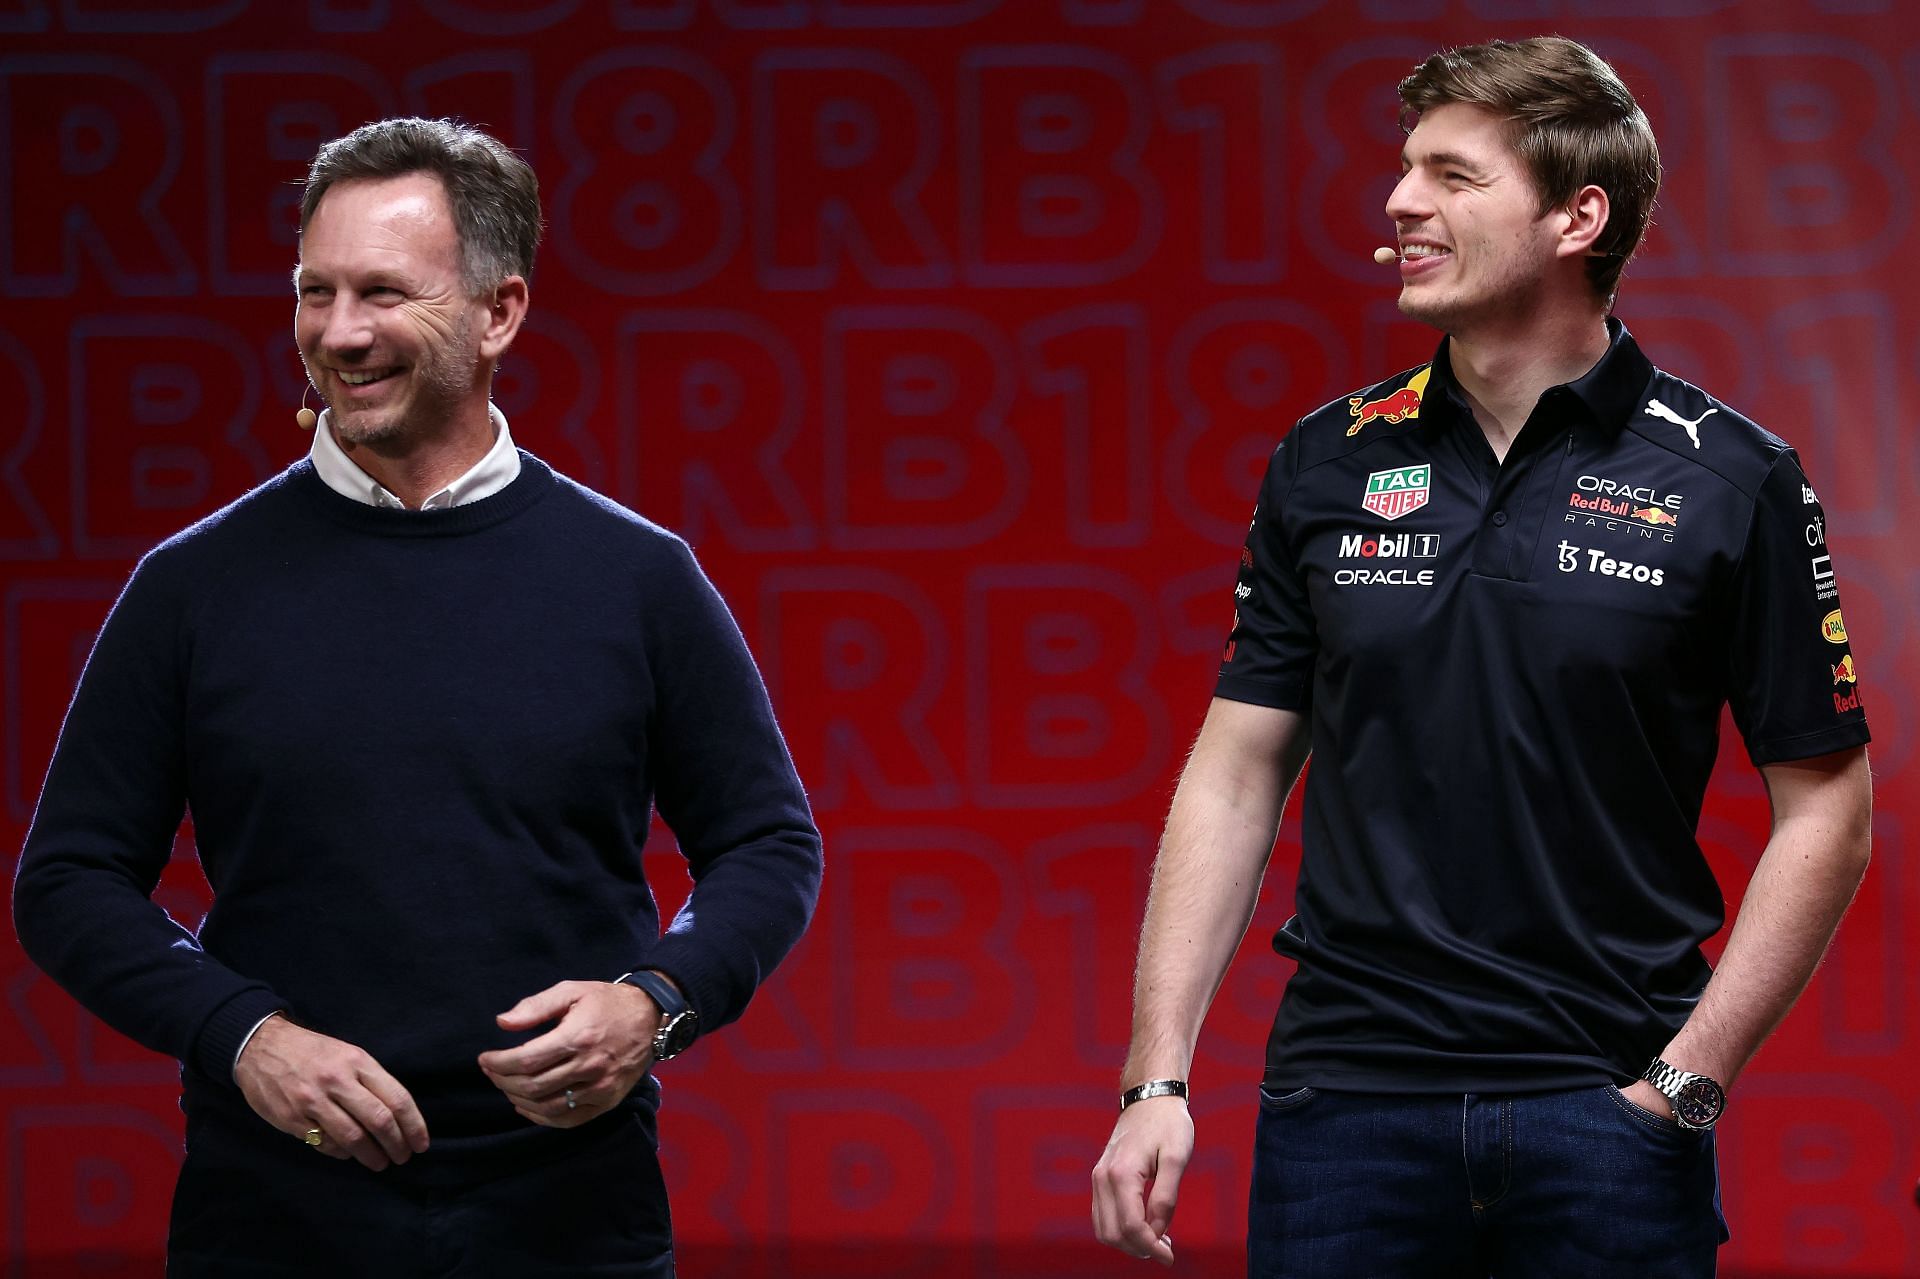 Christian Horner (left) and Max Verstappen (right) during the launch of the Red Bull RB18 (Photo by Bryn Lennon/Getty Images)